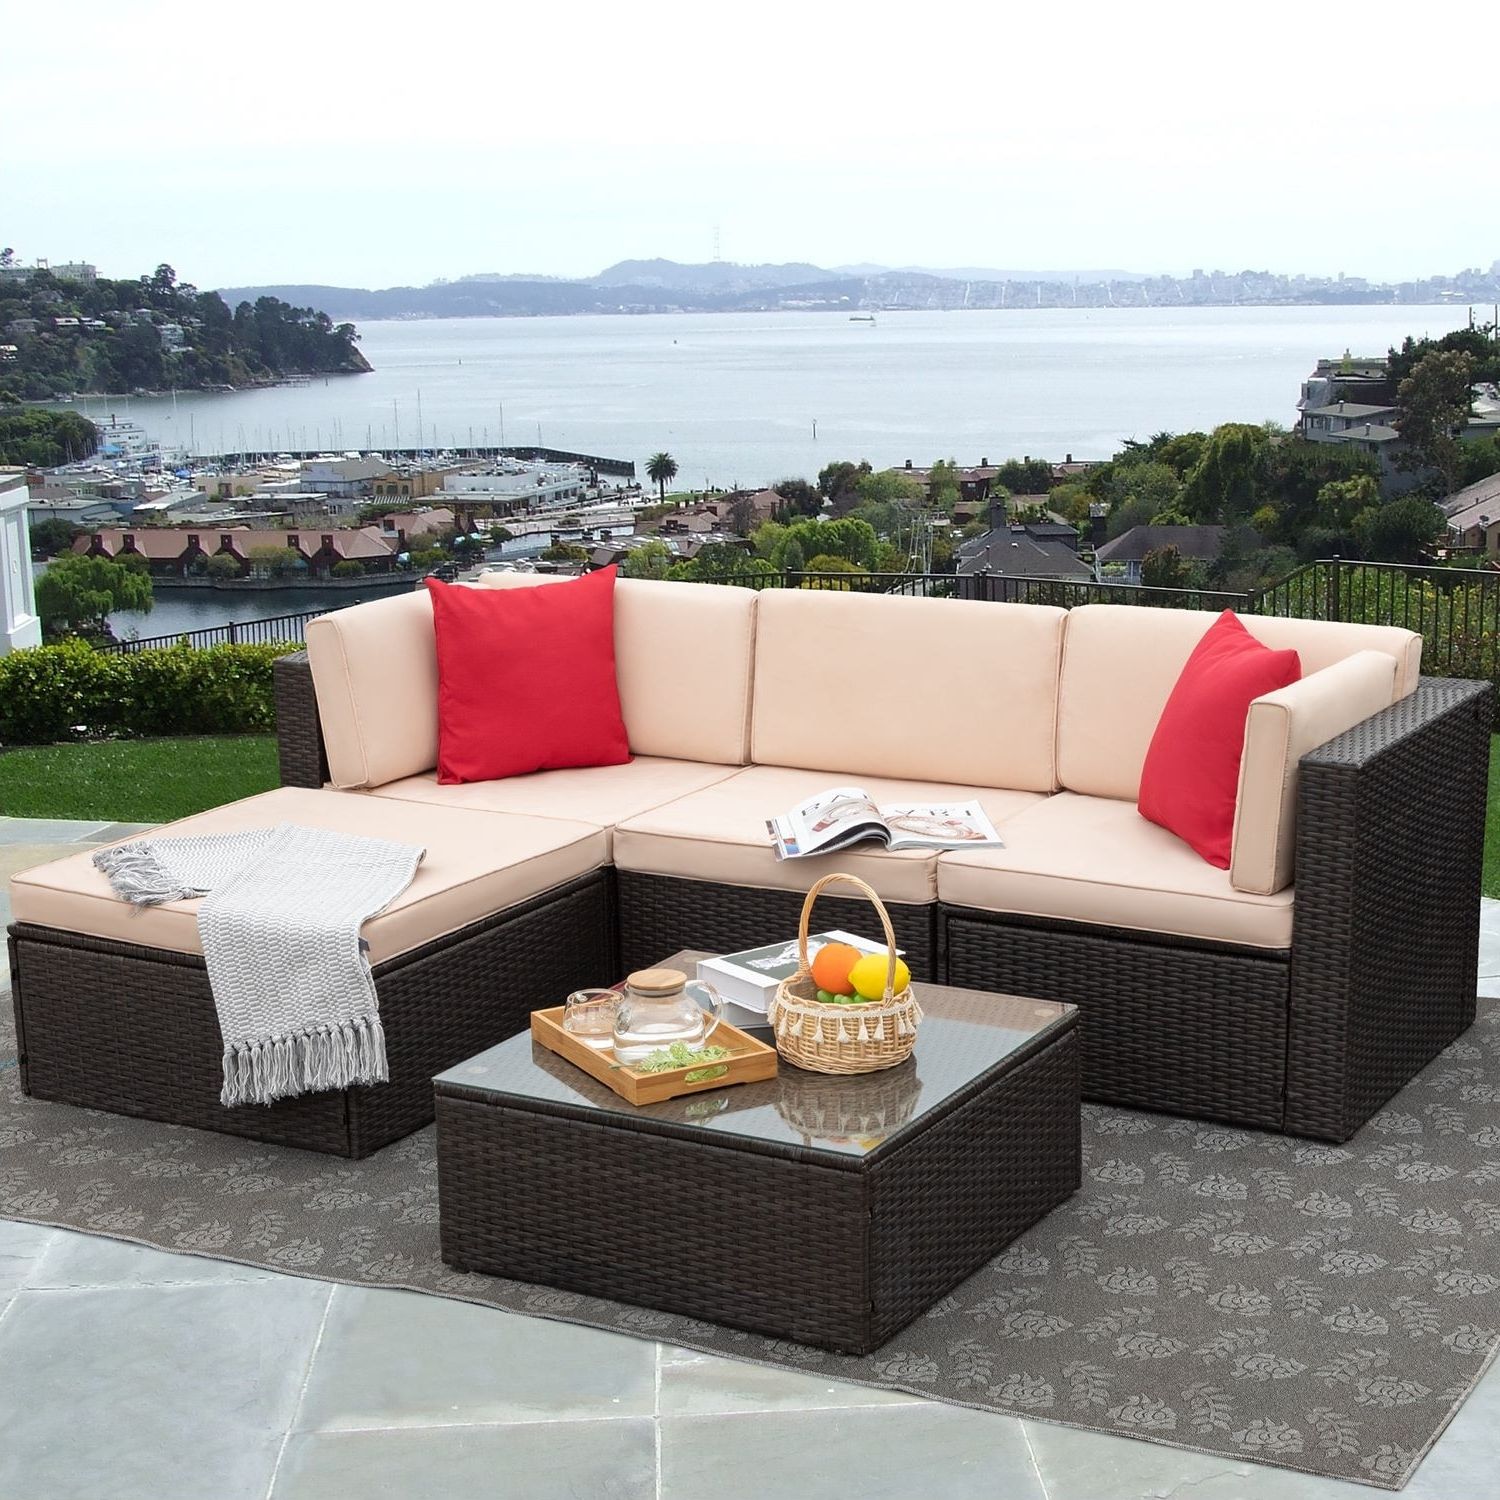 Homall 5 Pieces Patio Furniture Sets Outdoor Sectional Sofa Manual Weaving  Rattan – On Sale – – 33138198 With Famous Outdoor Rattan Sectional Sofas With Coffee Table (View 8 of 15)